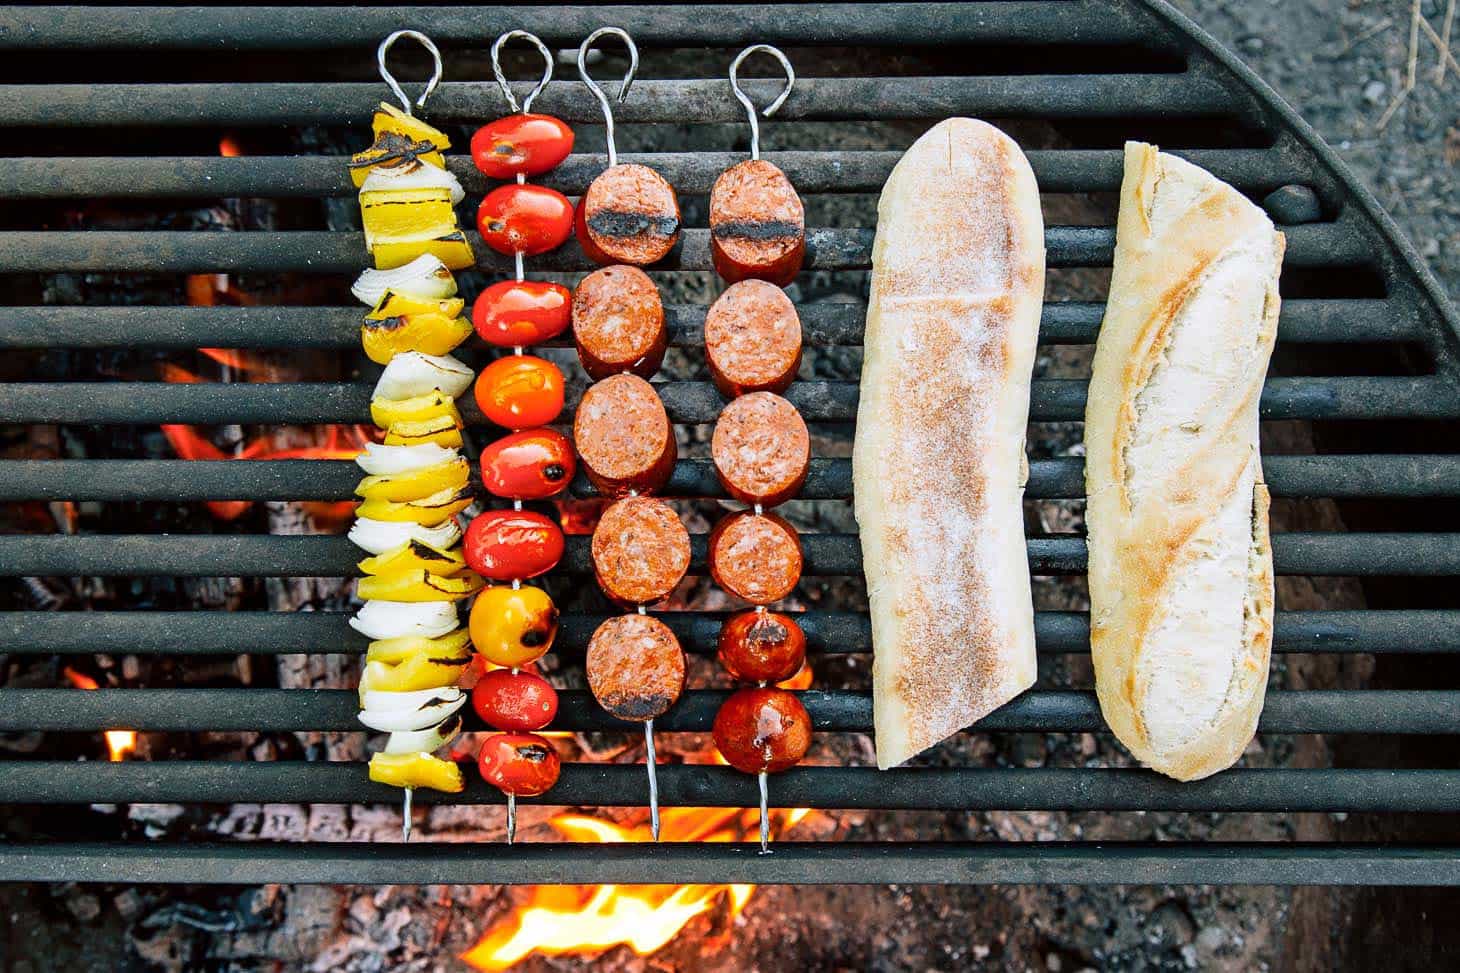 Grilling chorizo kebabs on the campfire